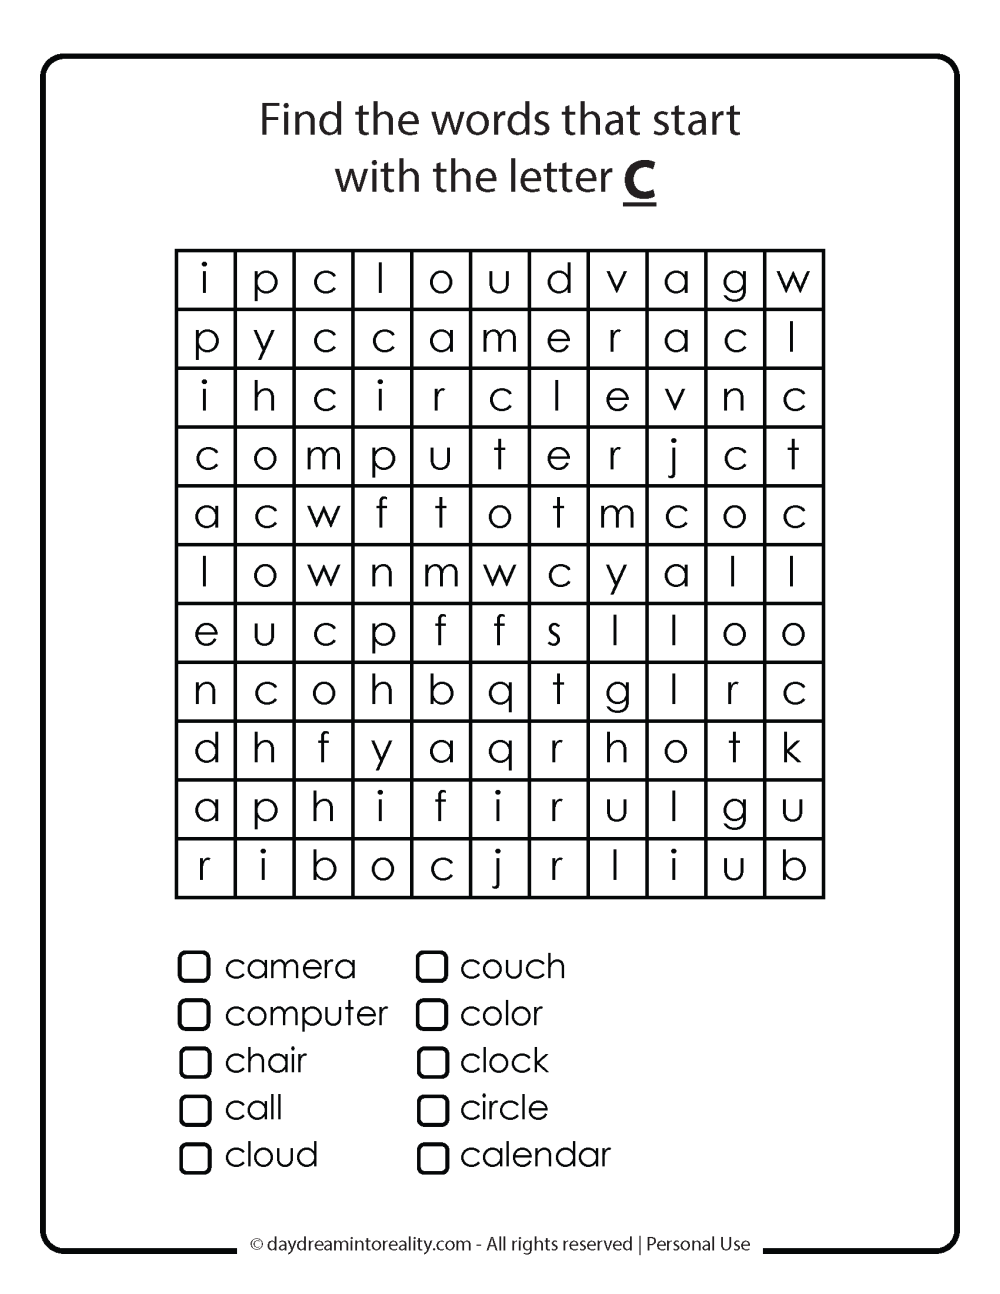 Letter C word search free printable